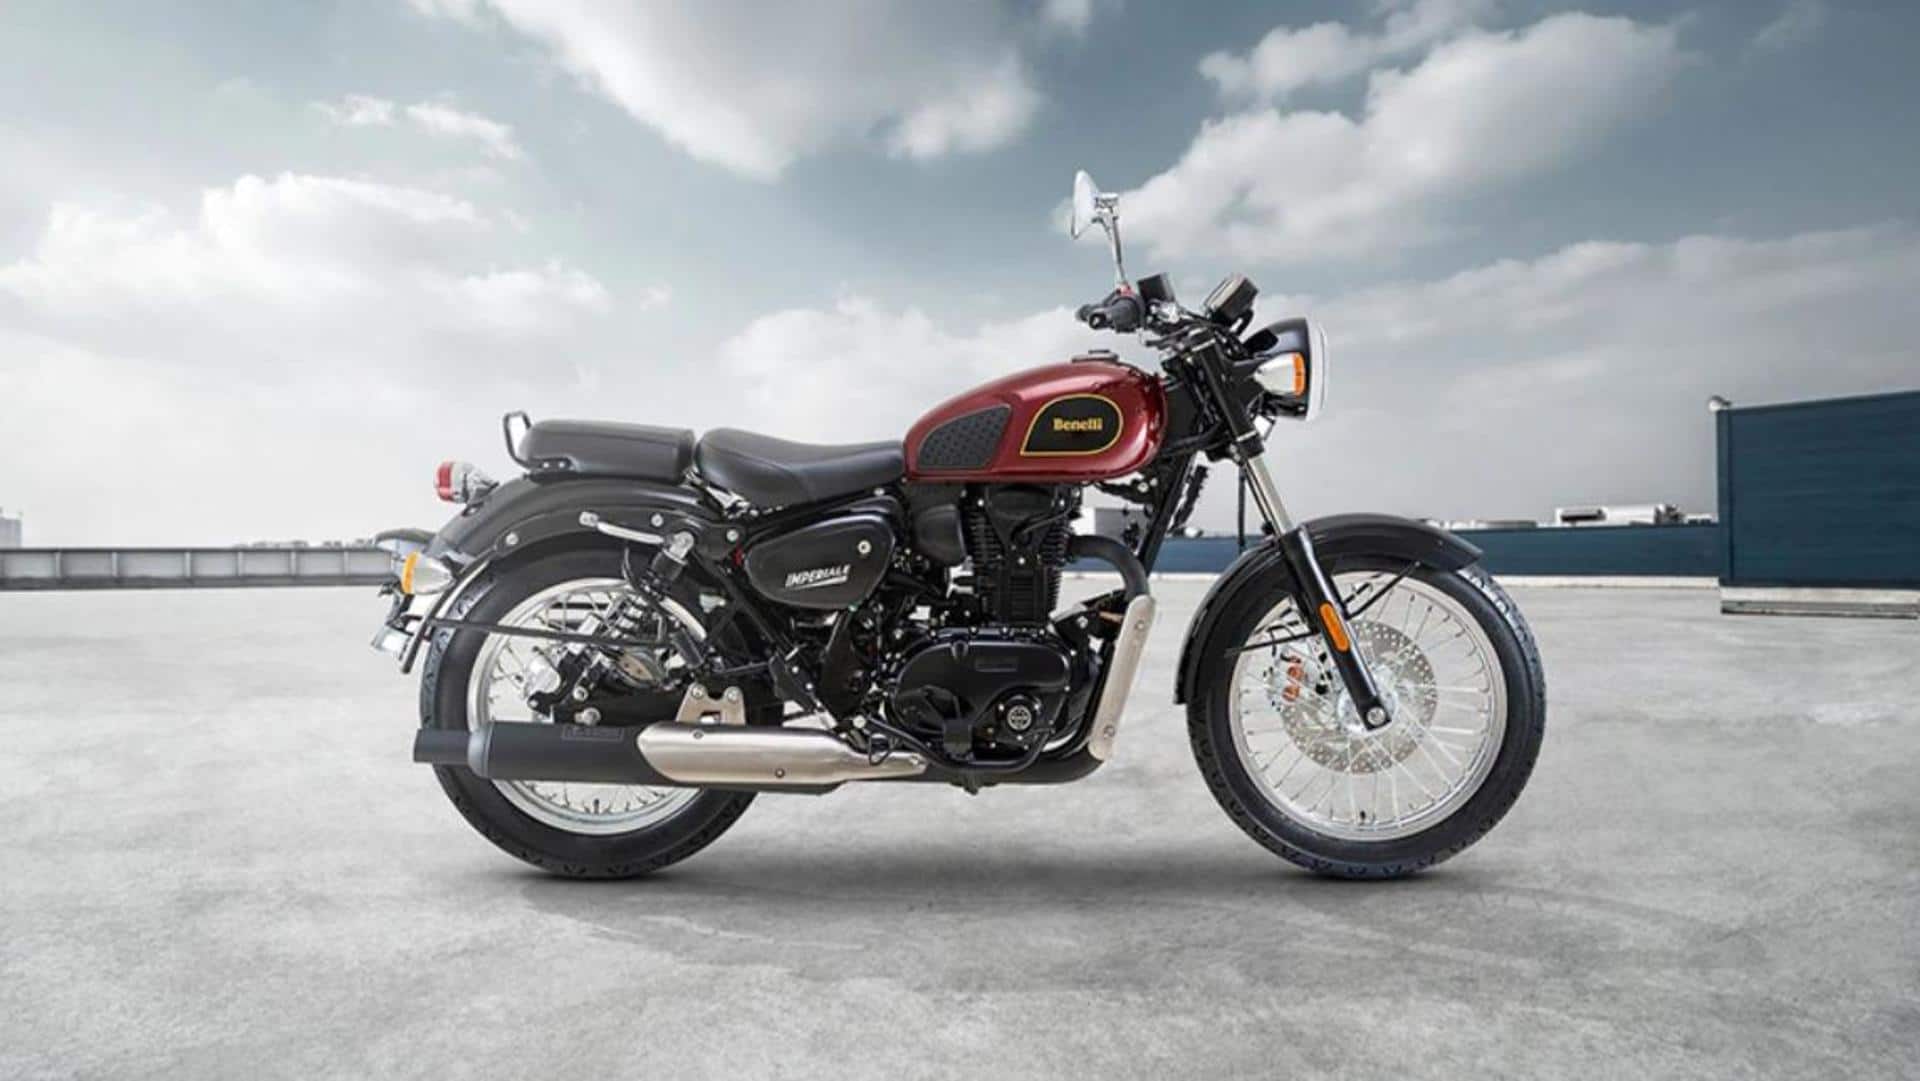 Benelli Imperiale 400 cruiser motorcycle becomes costlier by Rs. 21,000